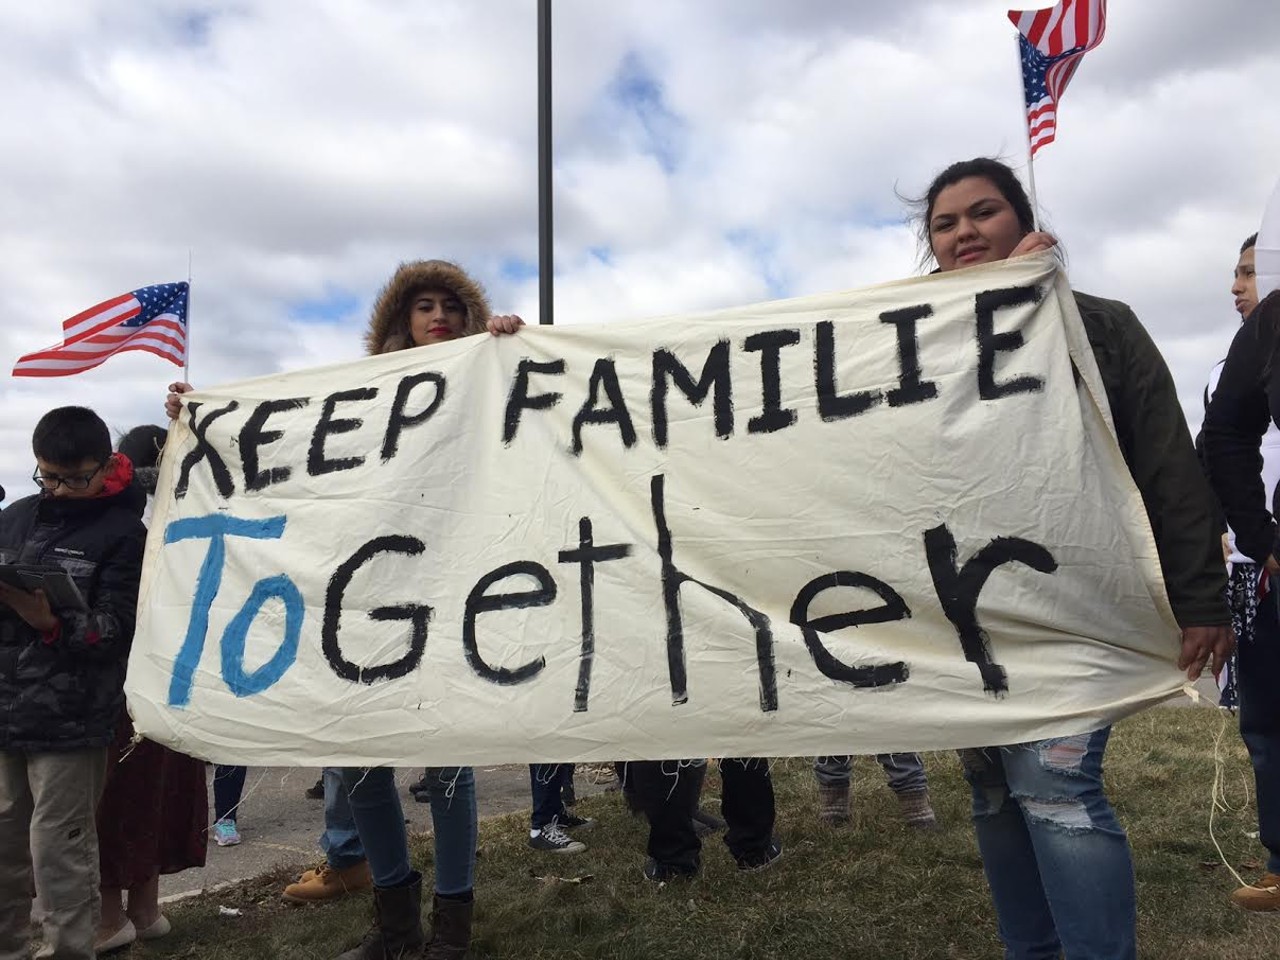 21 amazing photos from the Day Without Immigrants protests